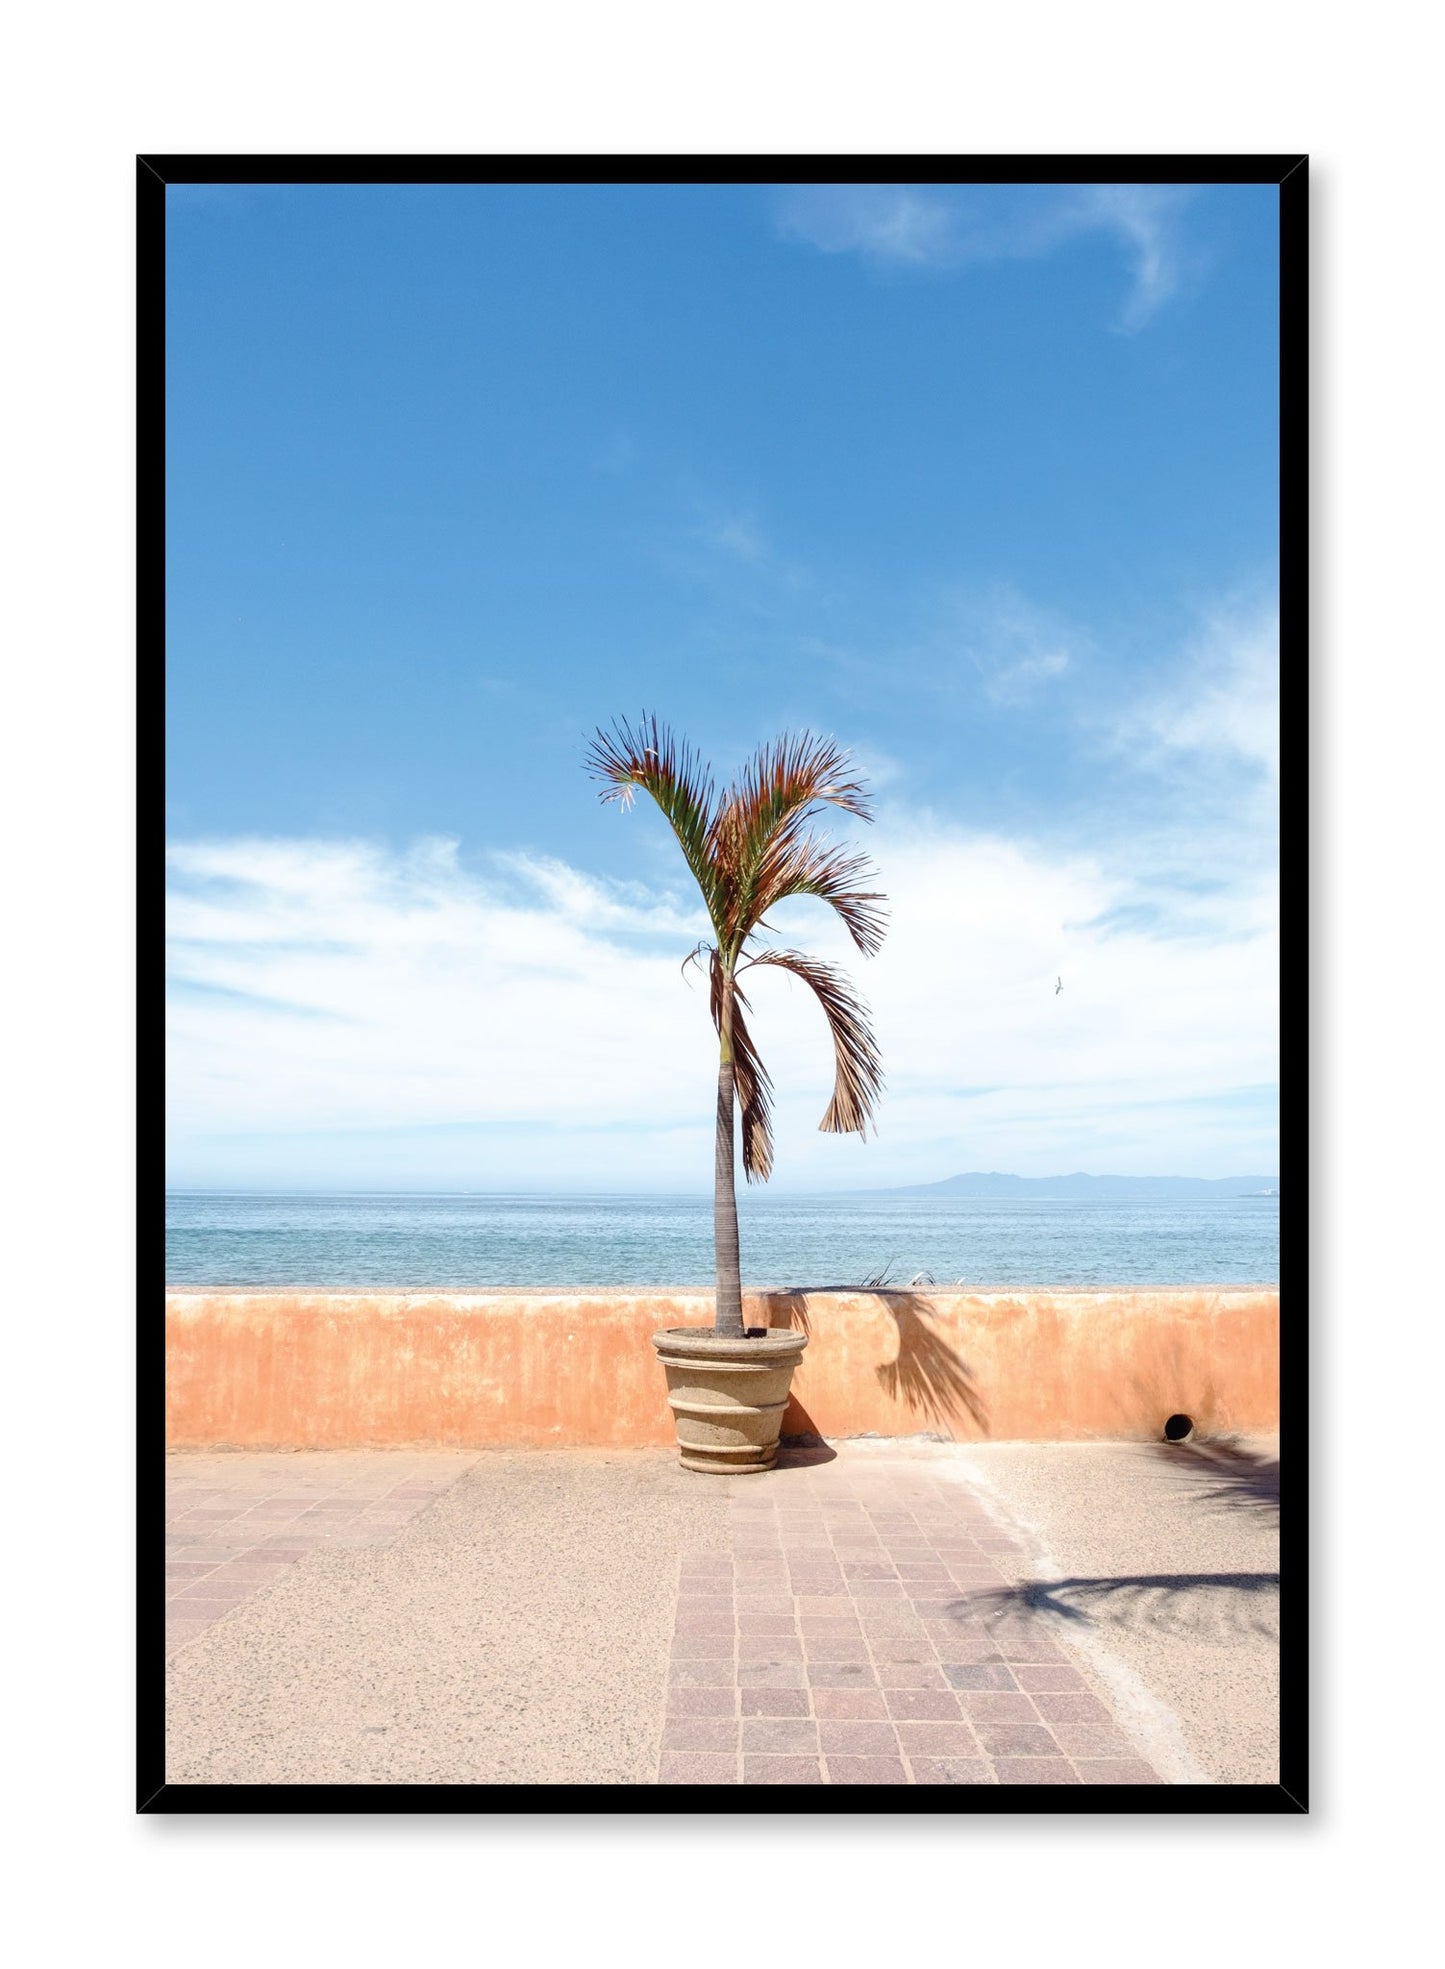 Minimalist design poster by Opposite Wall with photography of palm tree on beach